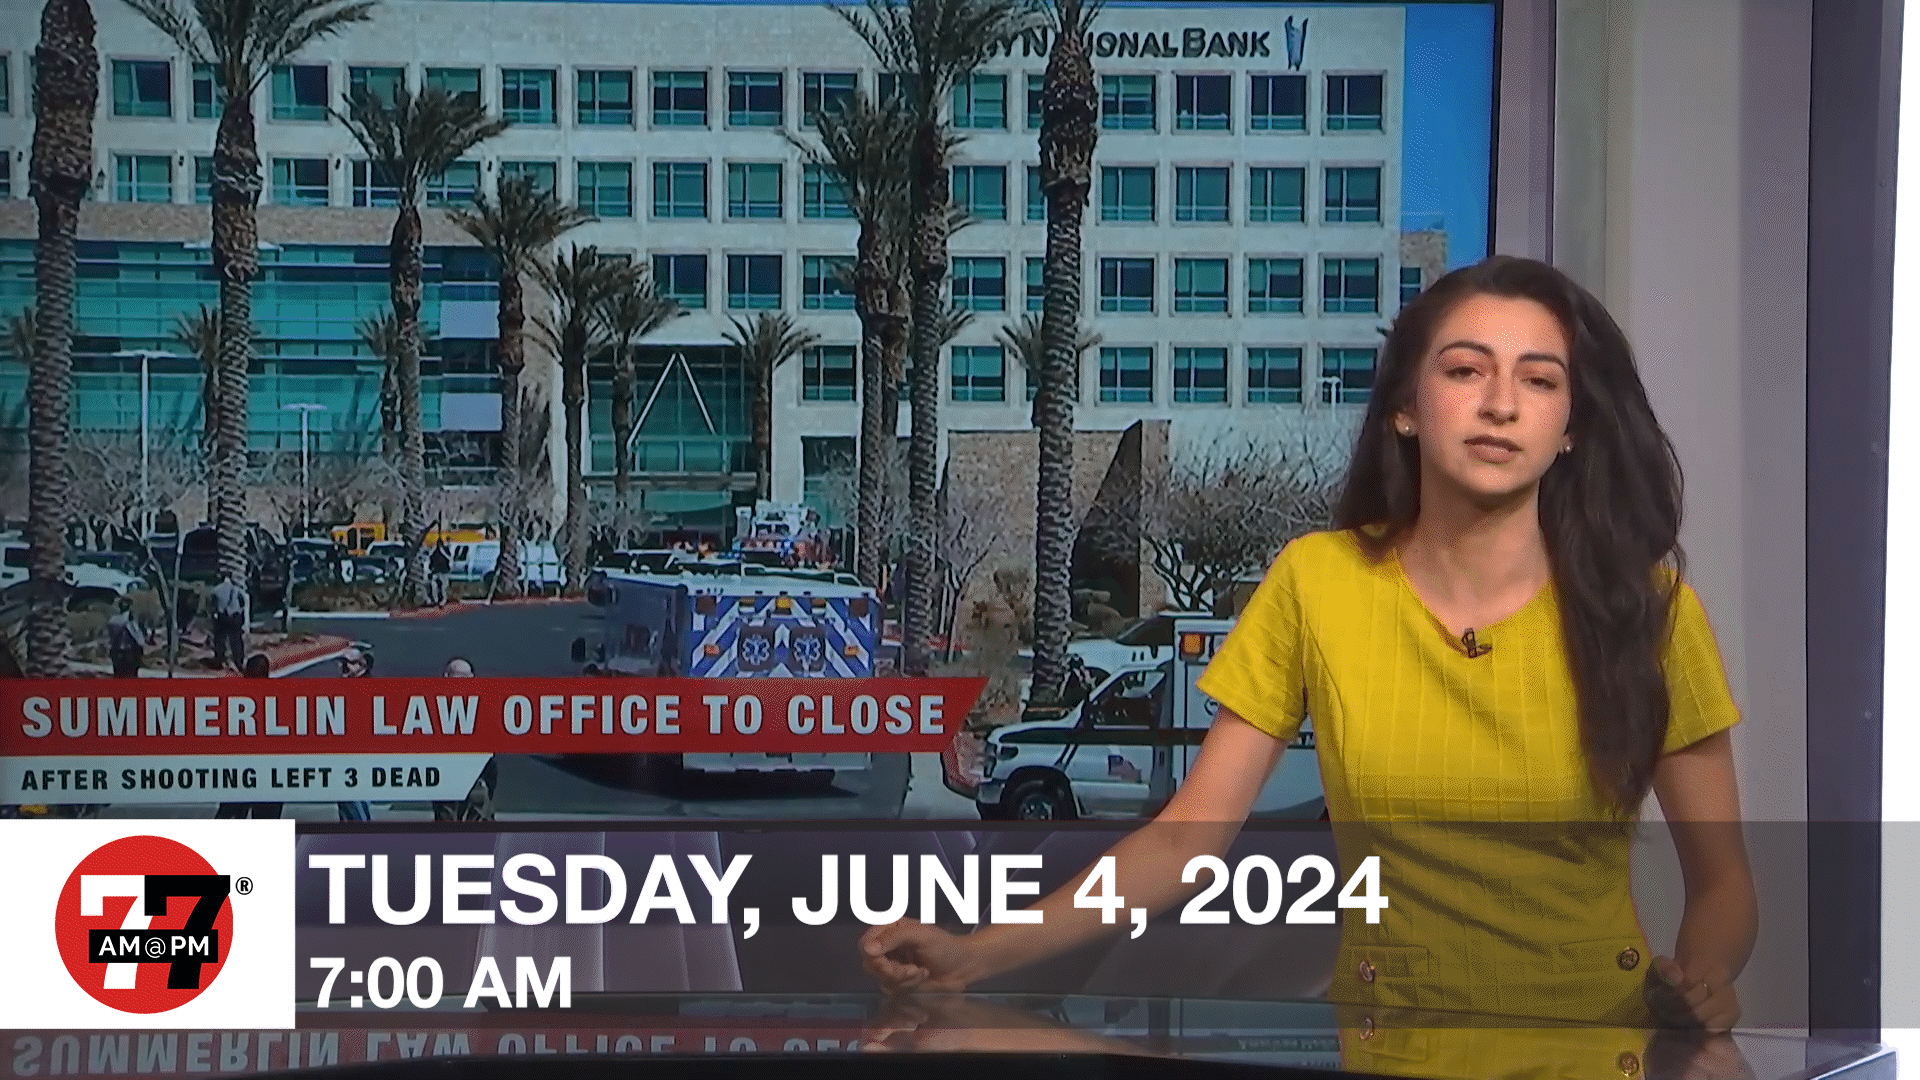 7@7 AM for Tuesday, June 4, 2024